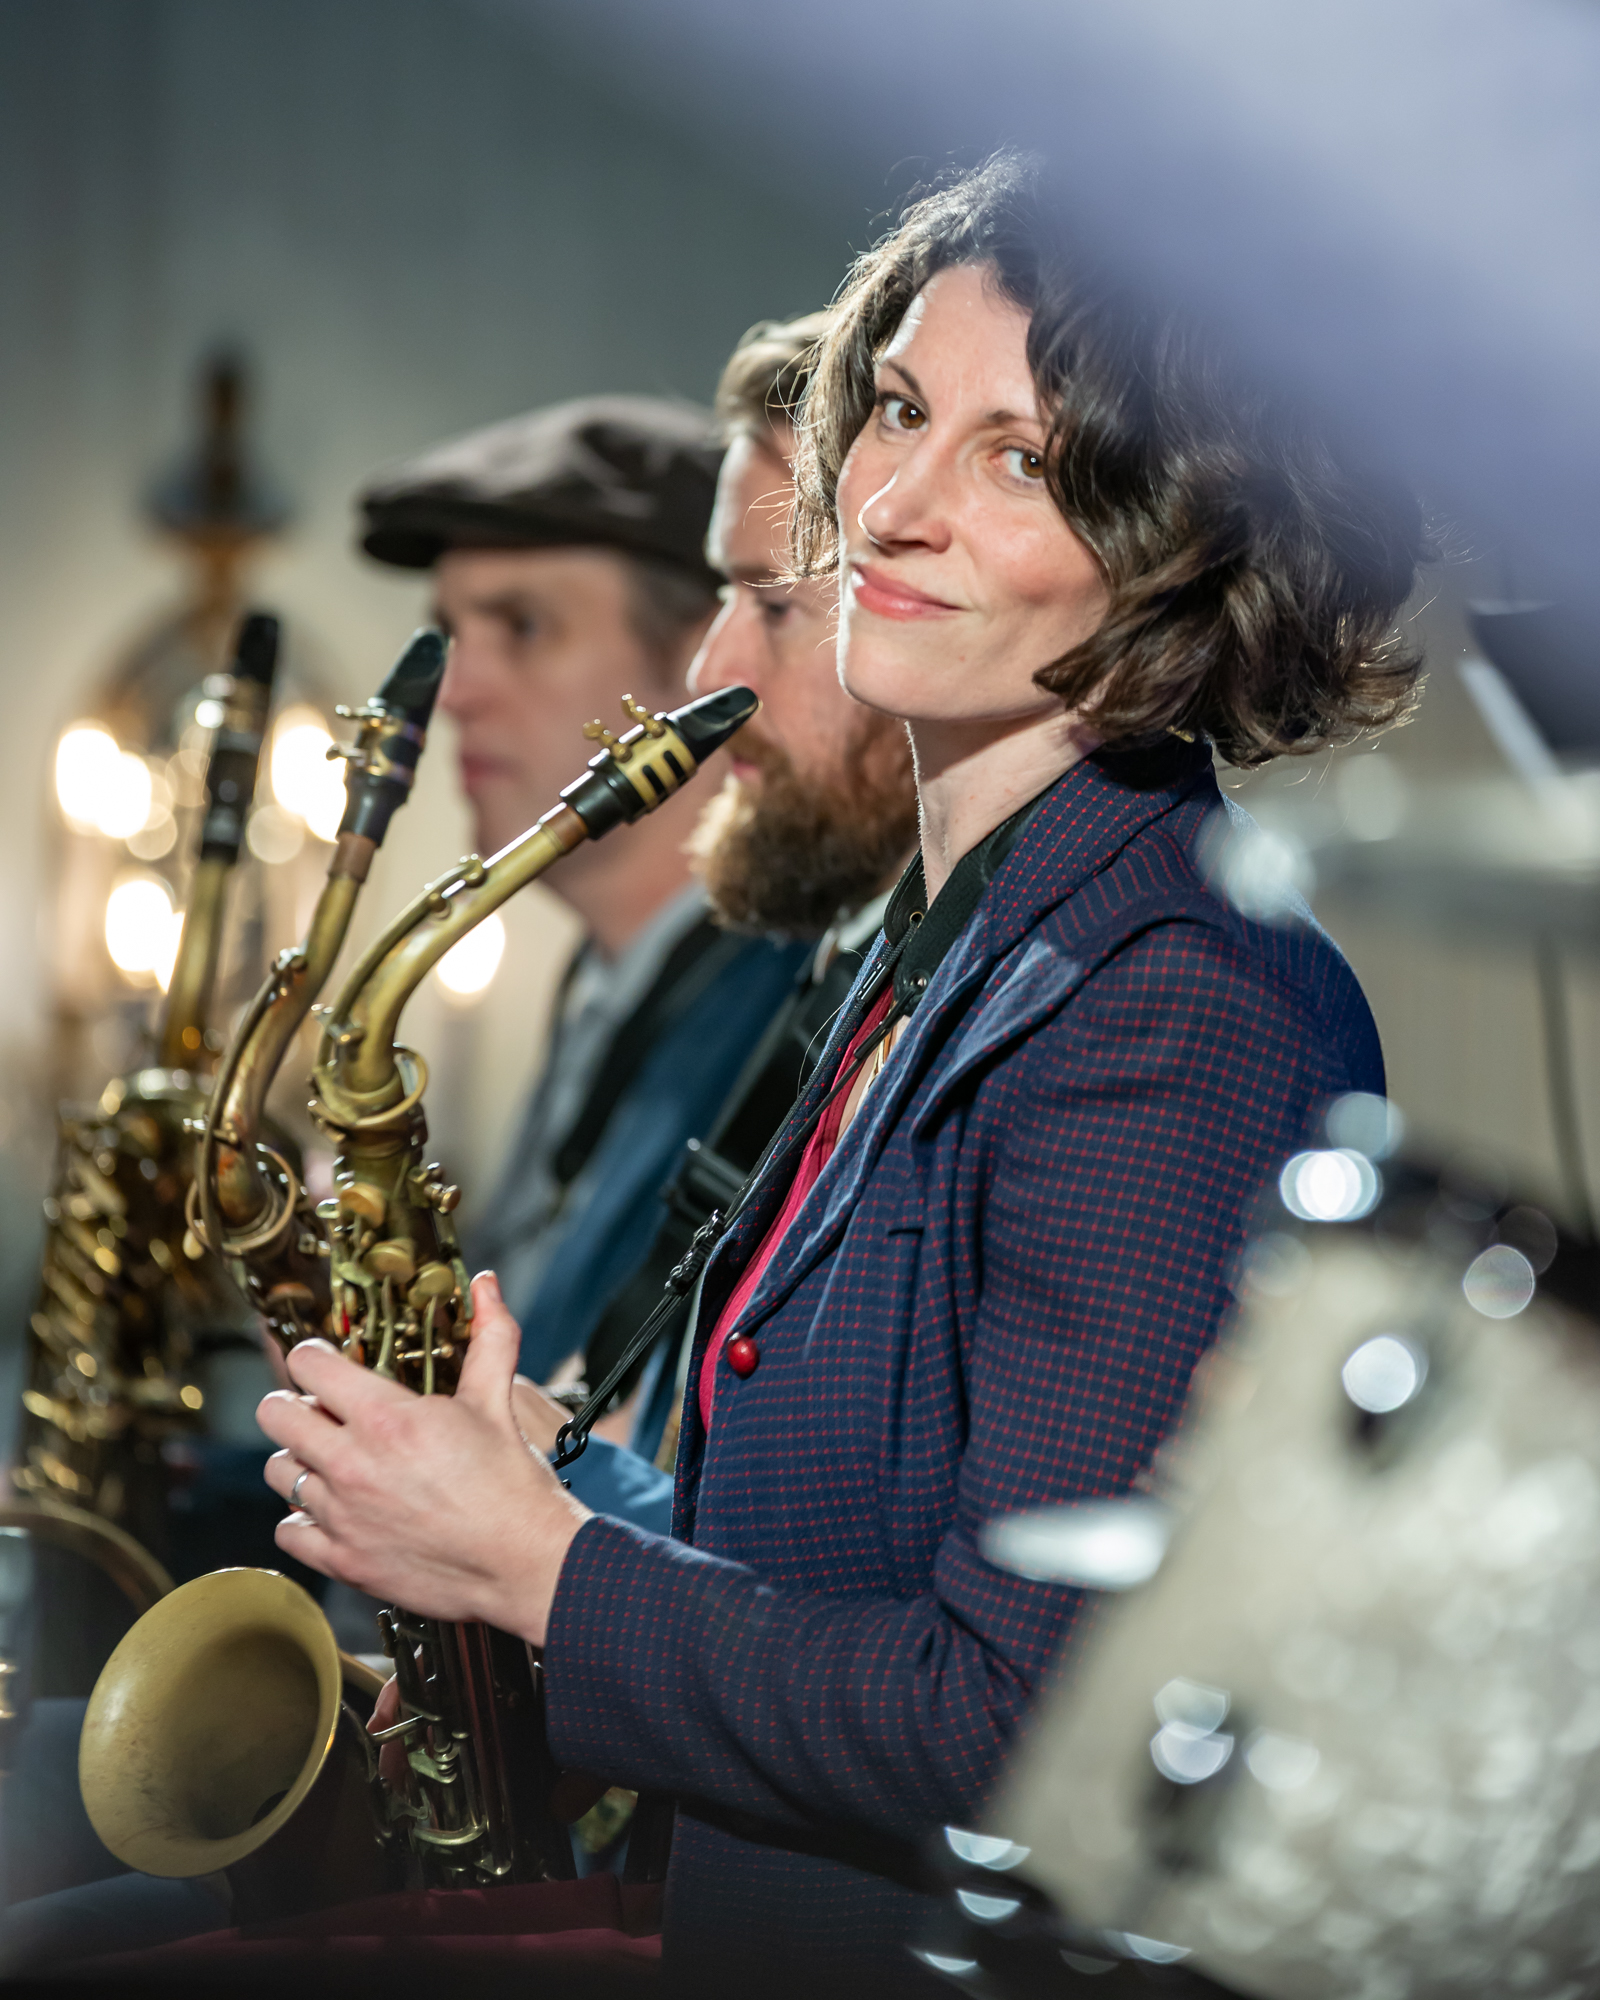 A woman holding a sax looking toward the camera with other brass instrument players sat behind her